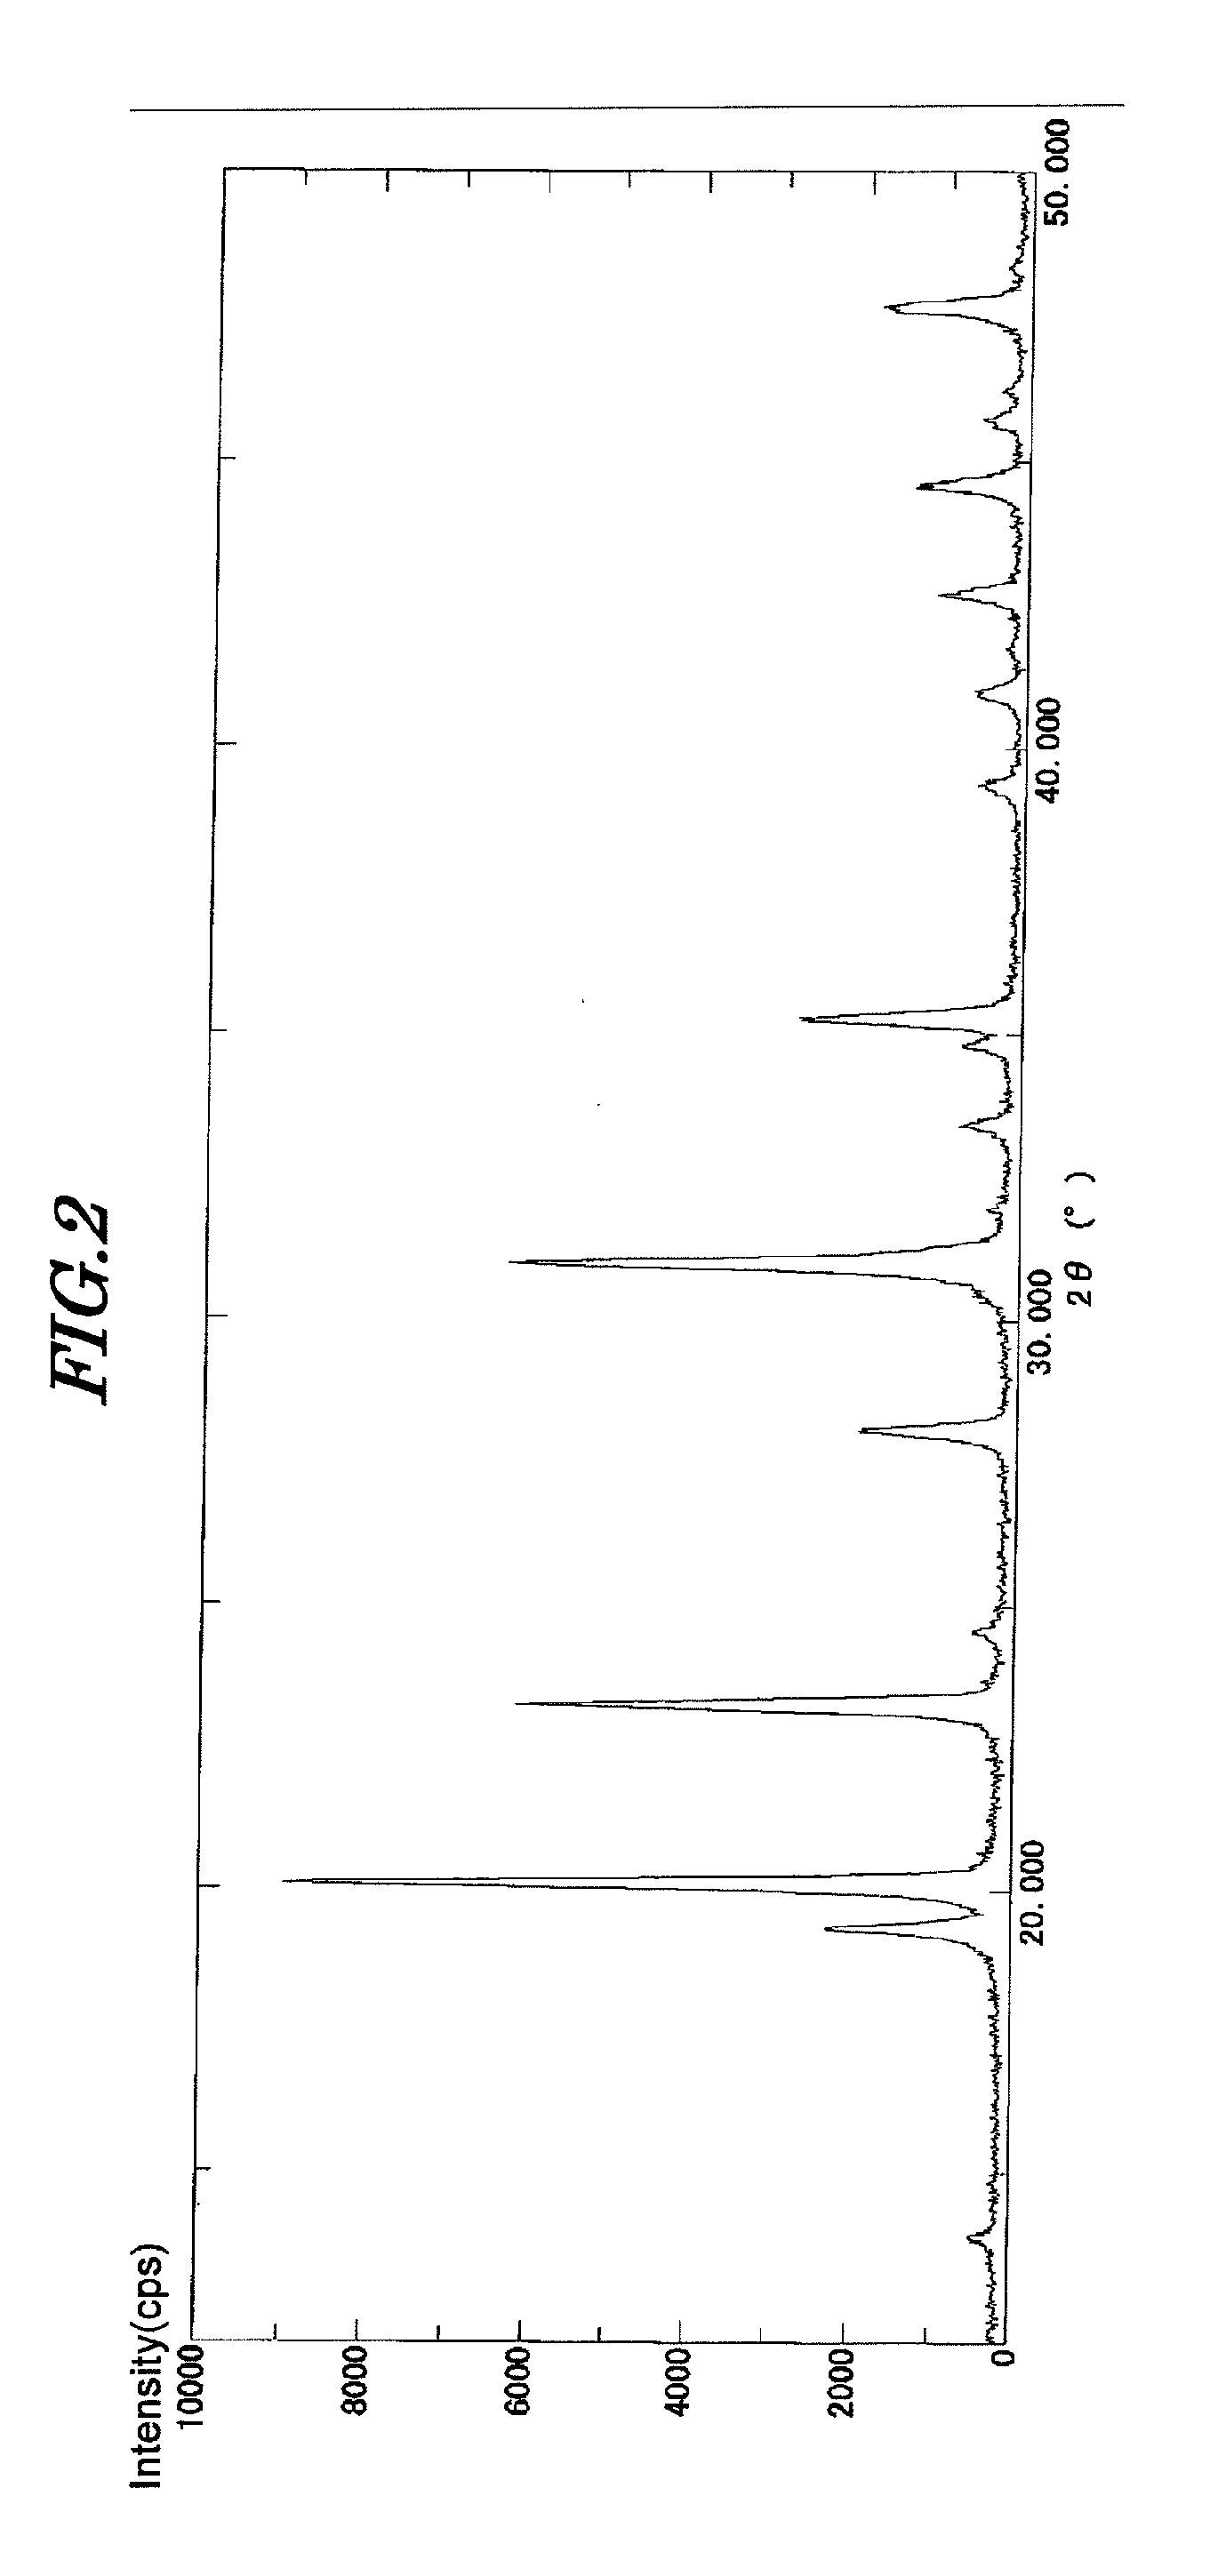 Silver-based inorganic antimicrobial agent, method for preparing the same and antimicrobial product